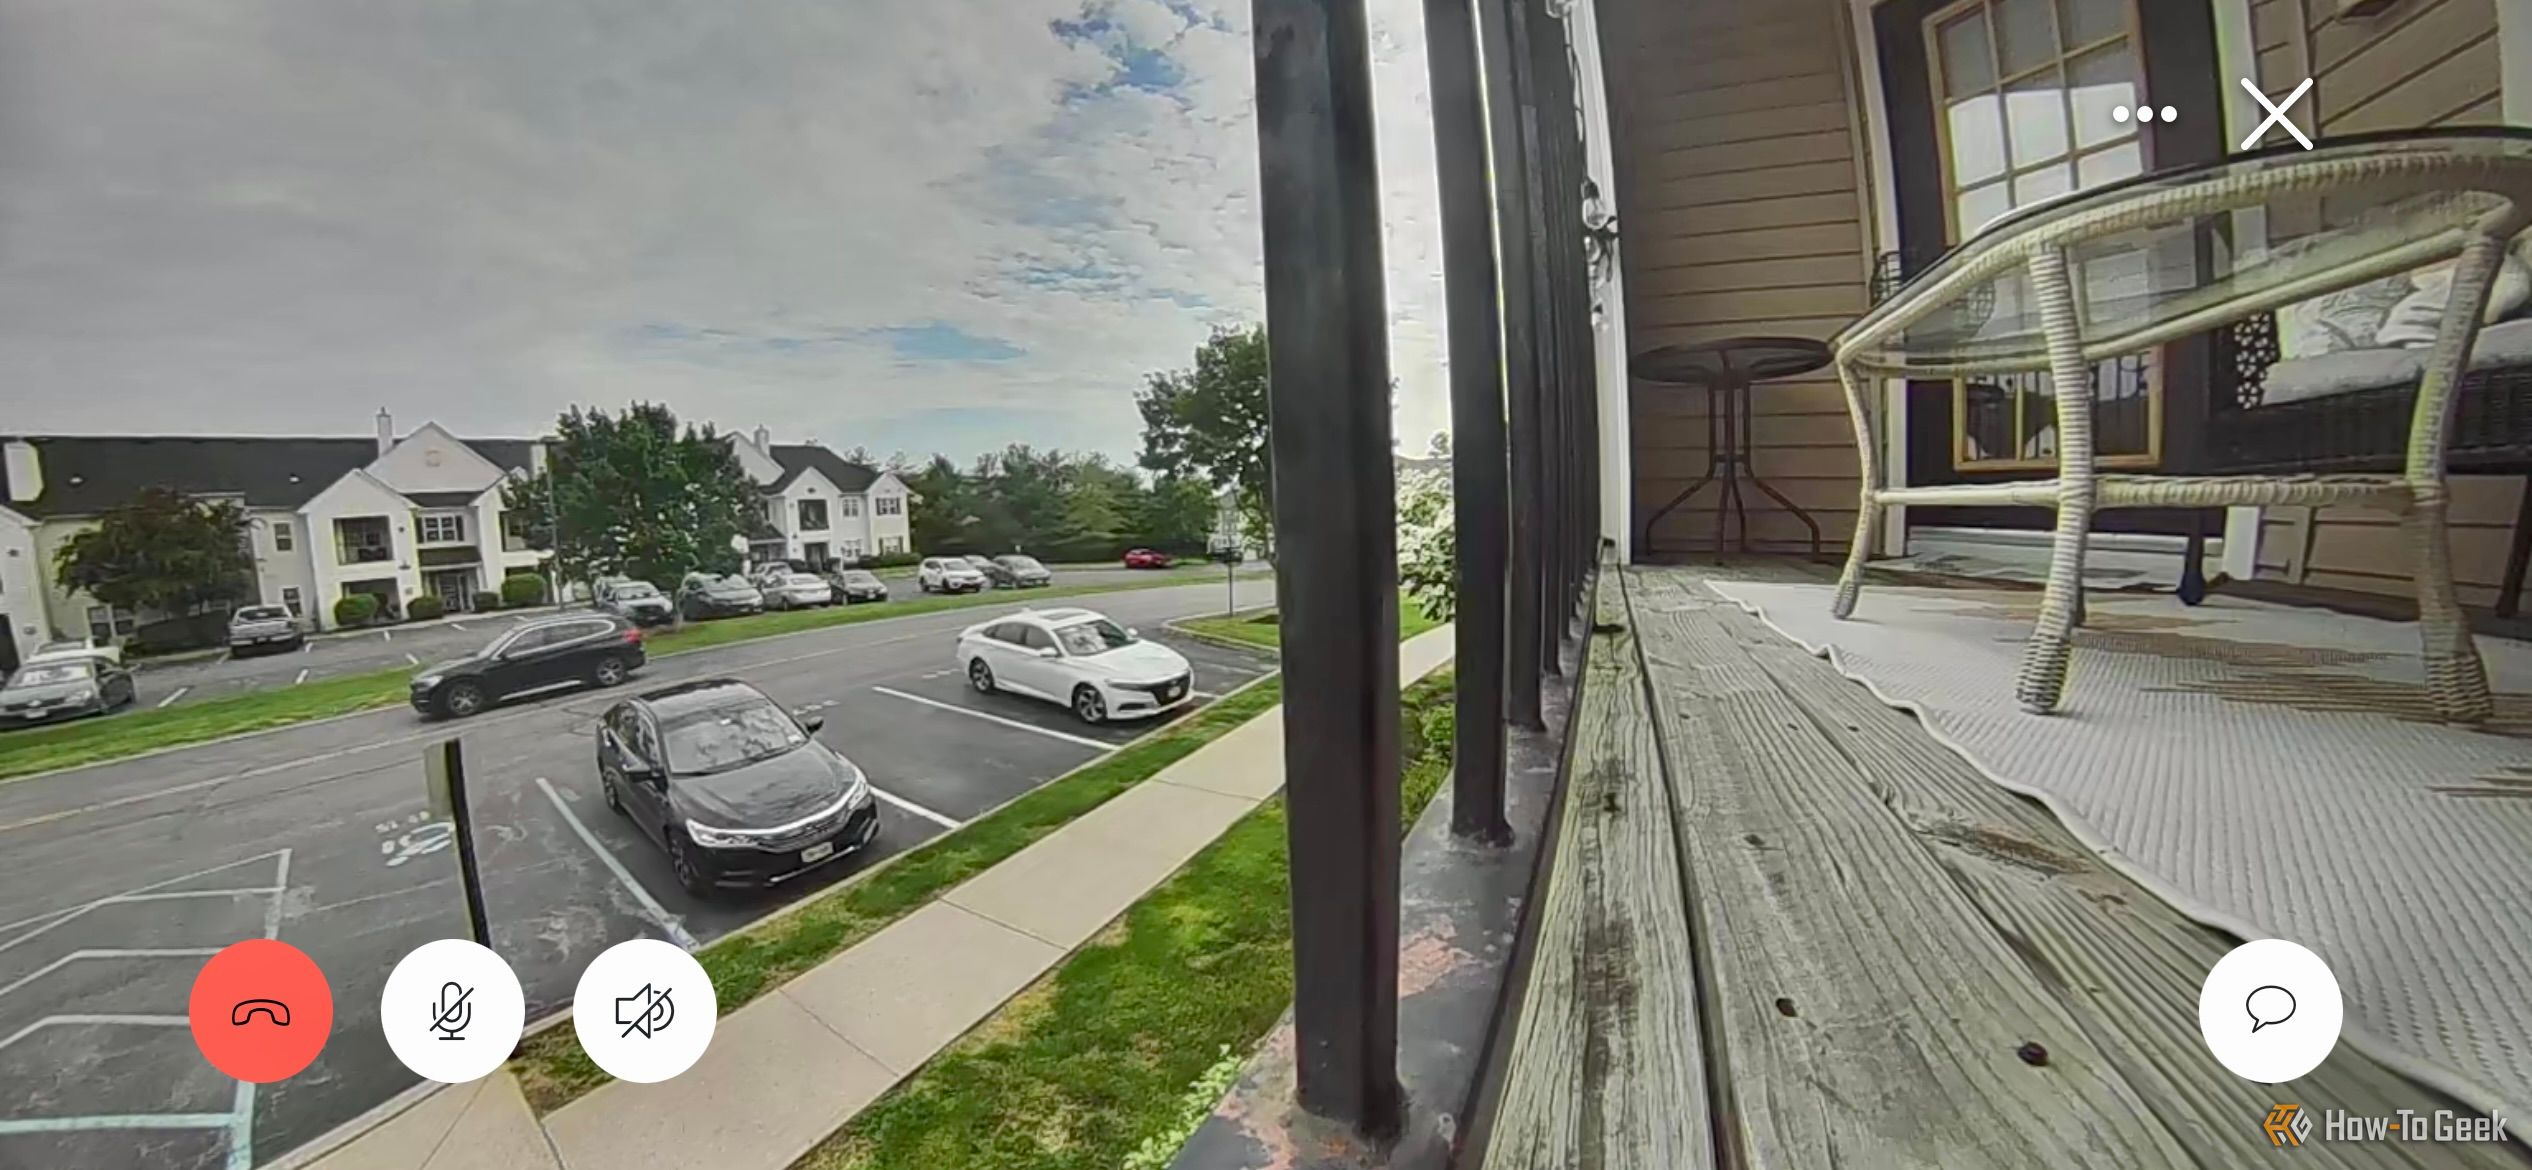 The Ring Battery Doorbell Pro's daytime footage